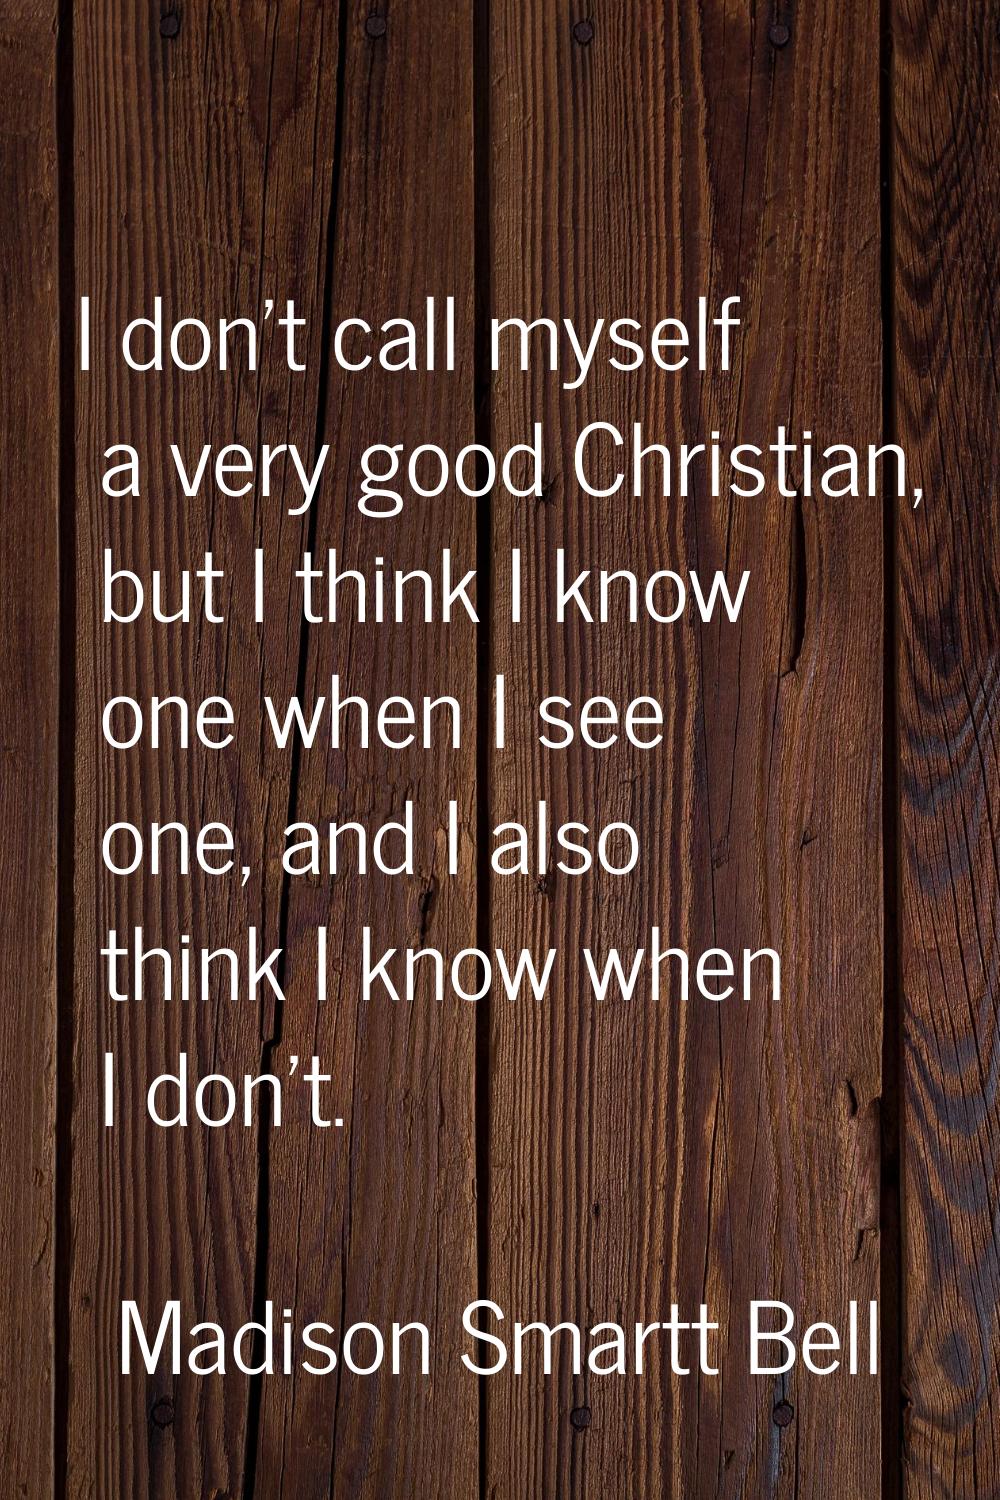 I don't call myself a very good Christian, but I think I know one when I see one, and I also think 